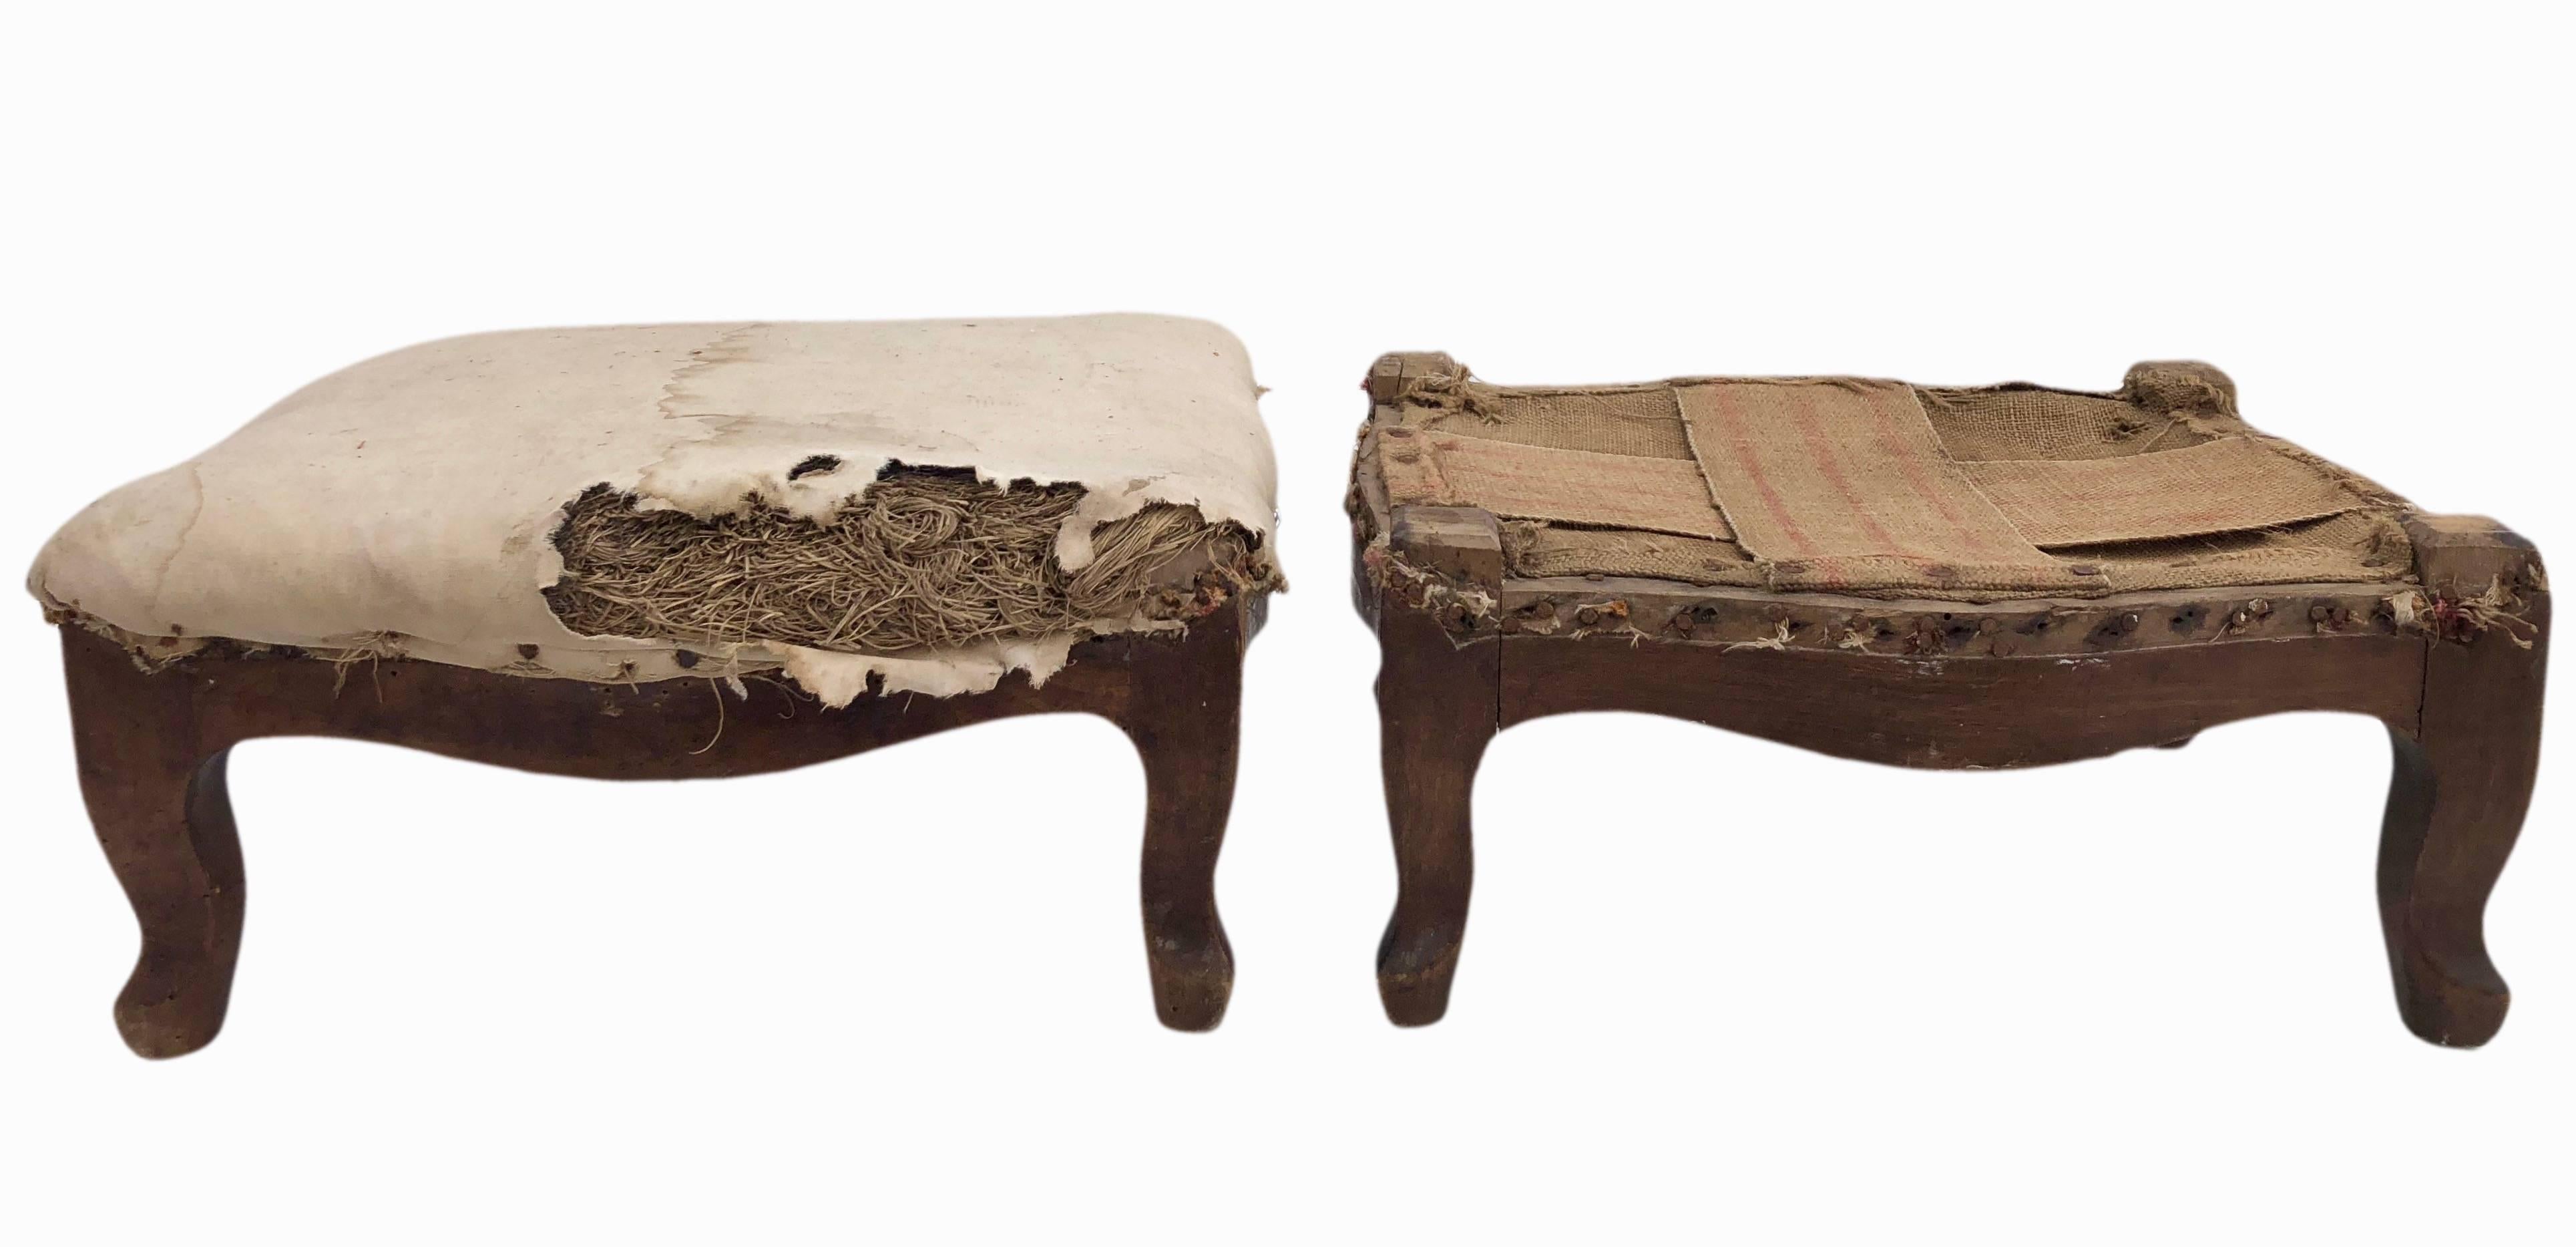 Pair of Wooden French Régence Footstools Stuffed with Straw, Early 1800s In Fair Condition For Sale In Petaluma, CA